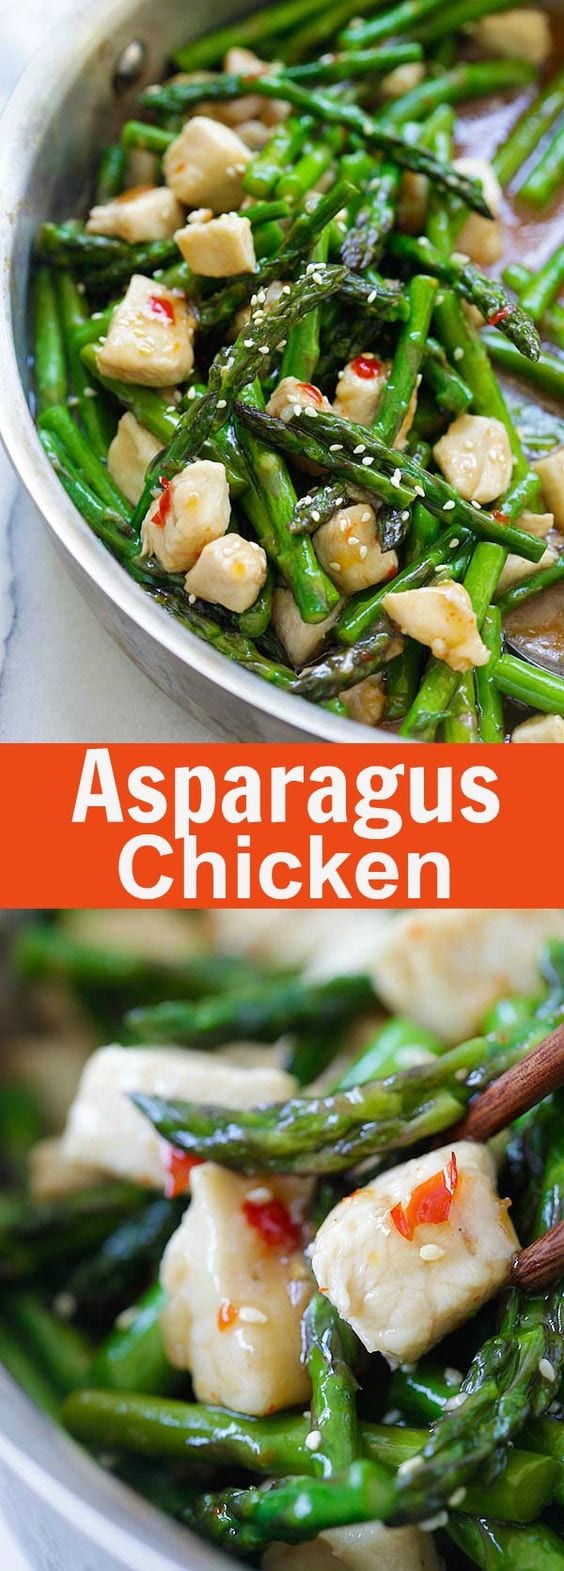 Chicken and Asparagus - healthy asparagus chicken stir-fry with a savory brown sauce and sweet chili sauce. Dinner is ready in 15 mins | rasamalaysia.com